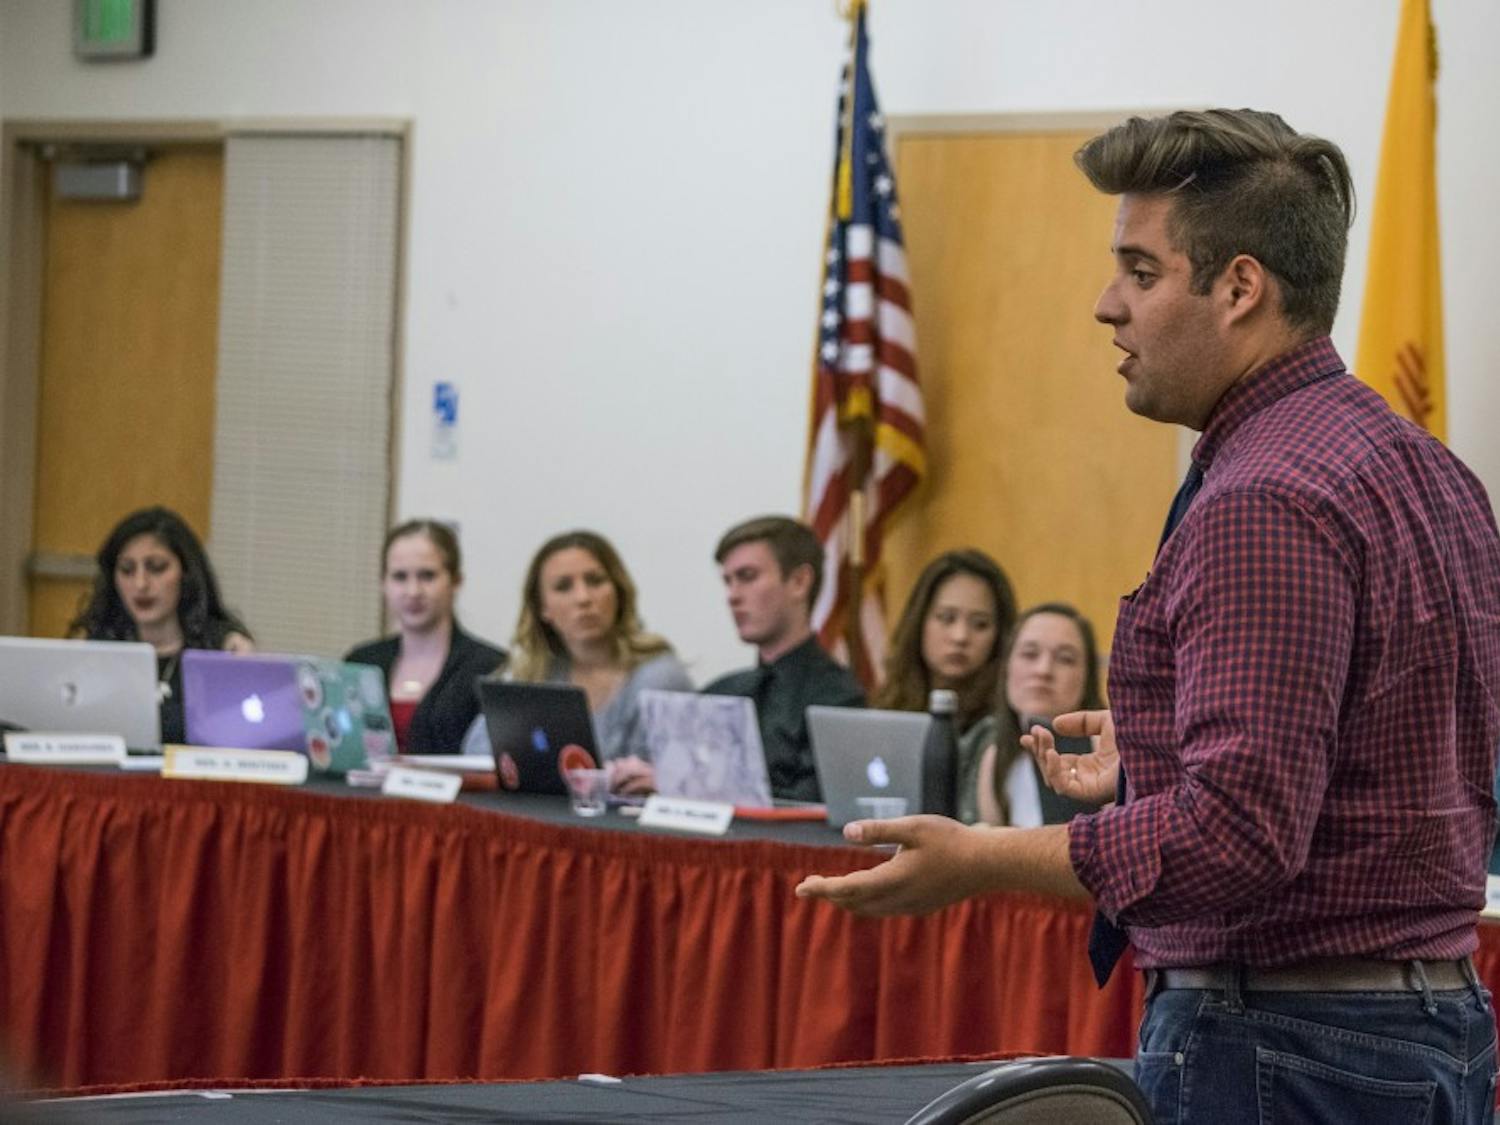 ASUNM President Kyle Biederwolf speaks to ASUNM representatives during an April 27, 2016 meeting at the SUB. Three senators who did not run in the spring ASUNM election will serve as senators in the fall, following a rare procedural undertaking in recent weeks